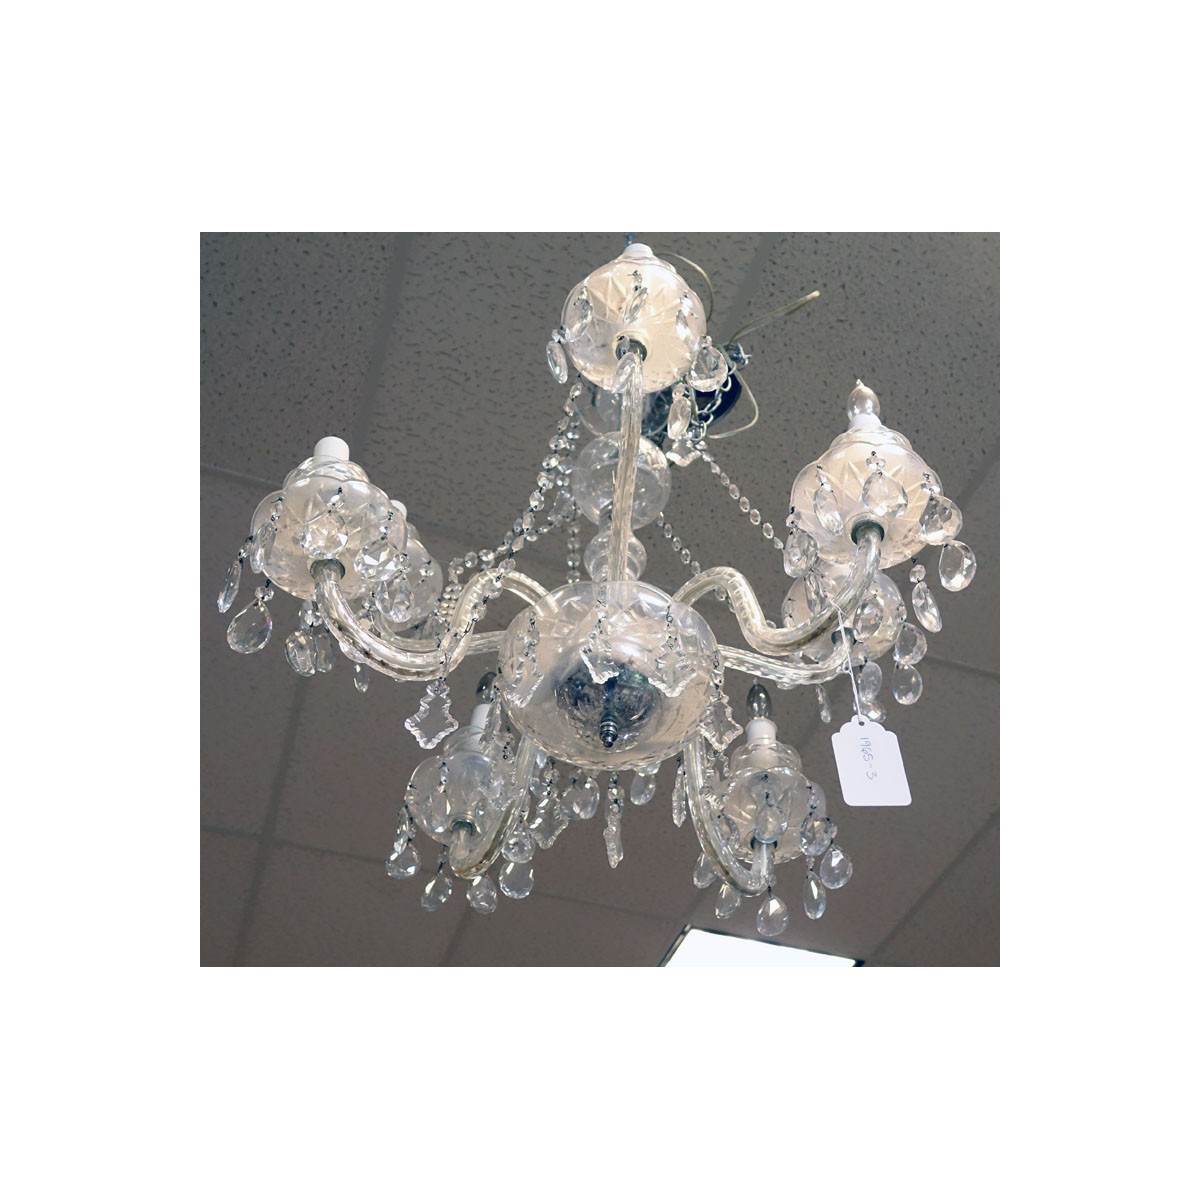 Mid Century Maria Theresa Style 8 Light Cut Crystal Chandelier with Hanging Prism. Missing two arms